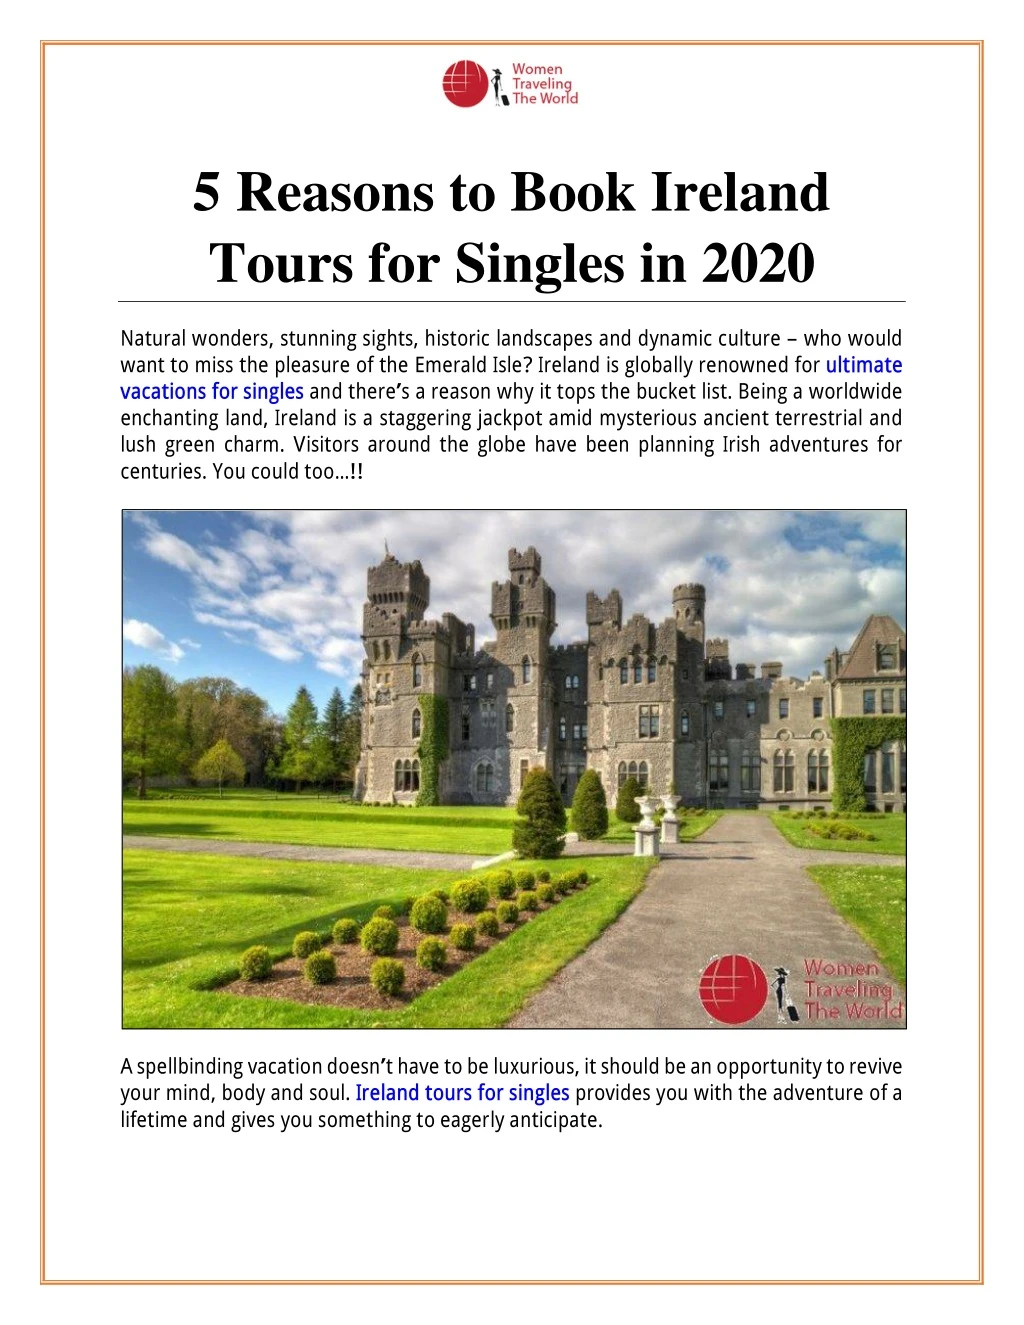 5 reasons to book ireland tours for singles